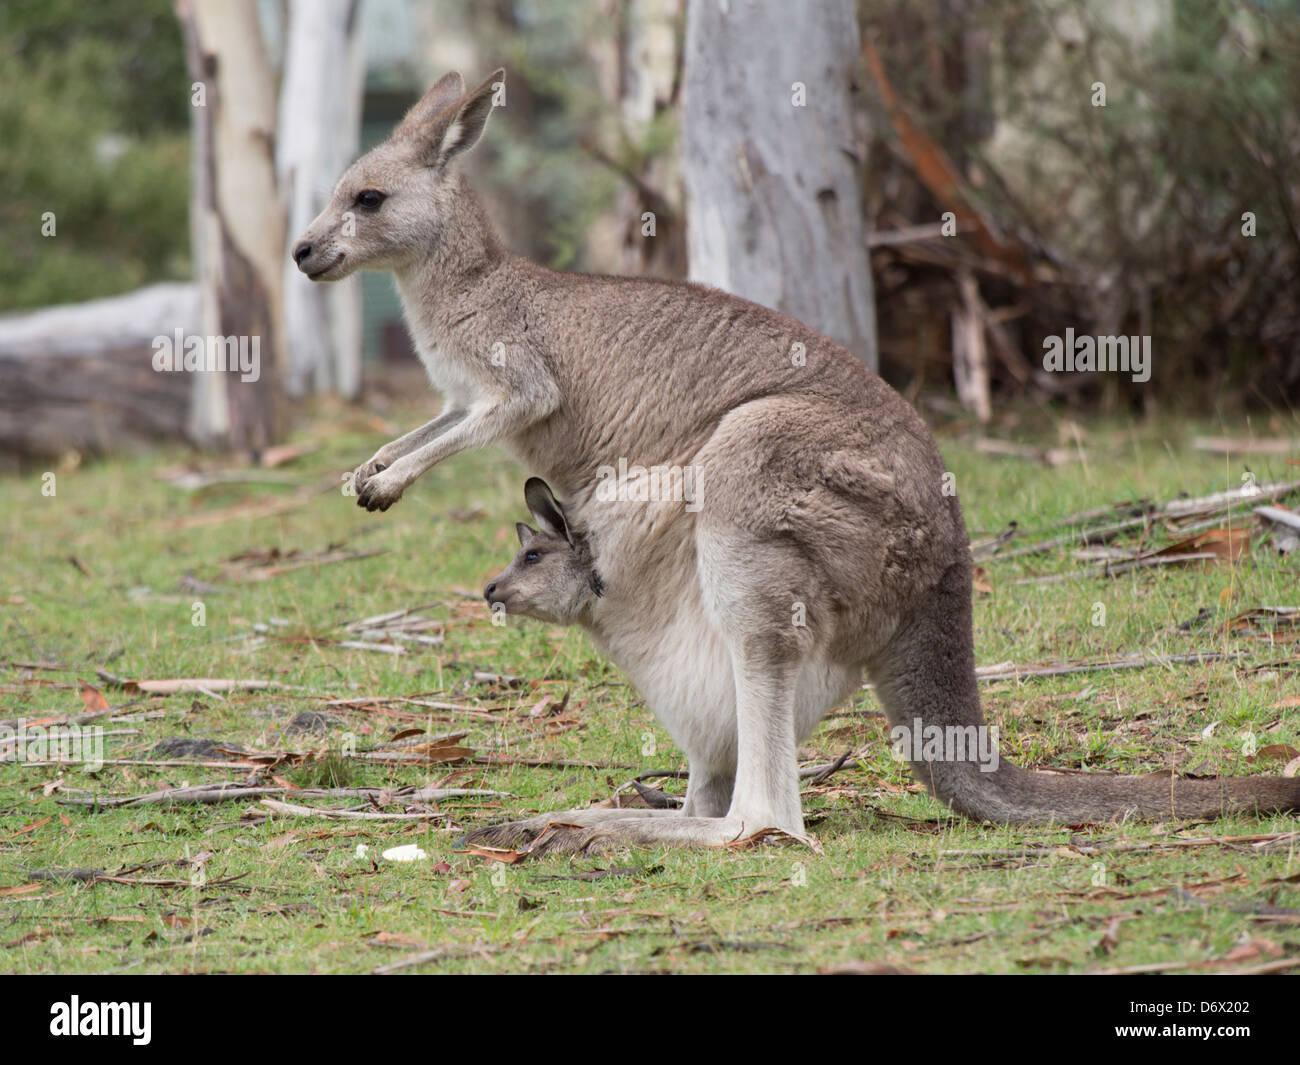 Mother kangaroo standing with ears back and baby joey hanging out of pouch Stock Photo